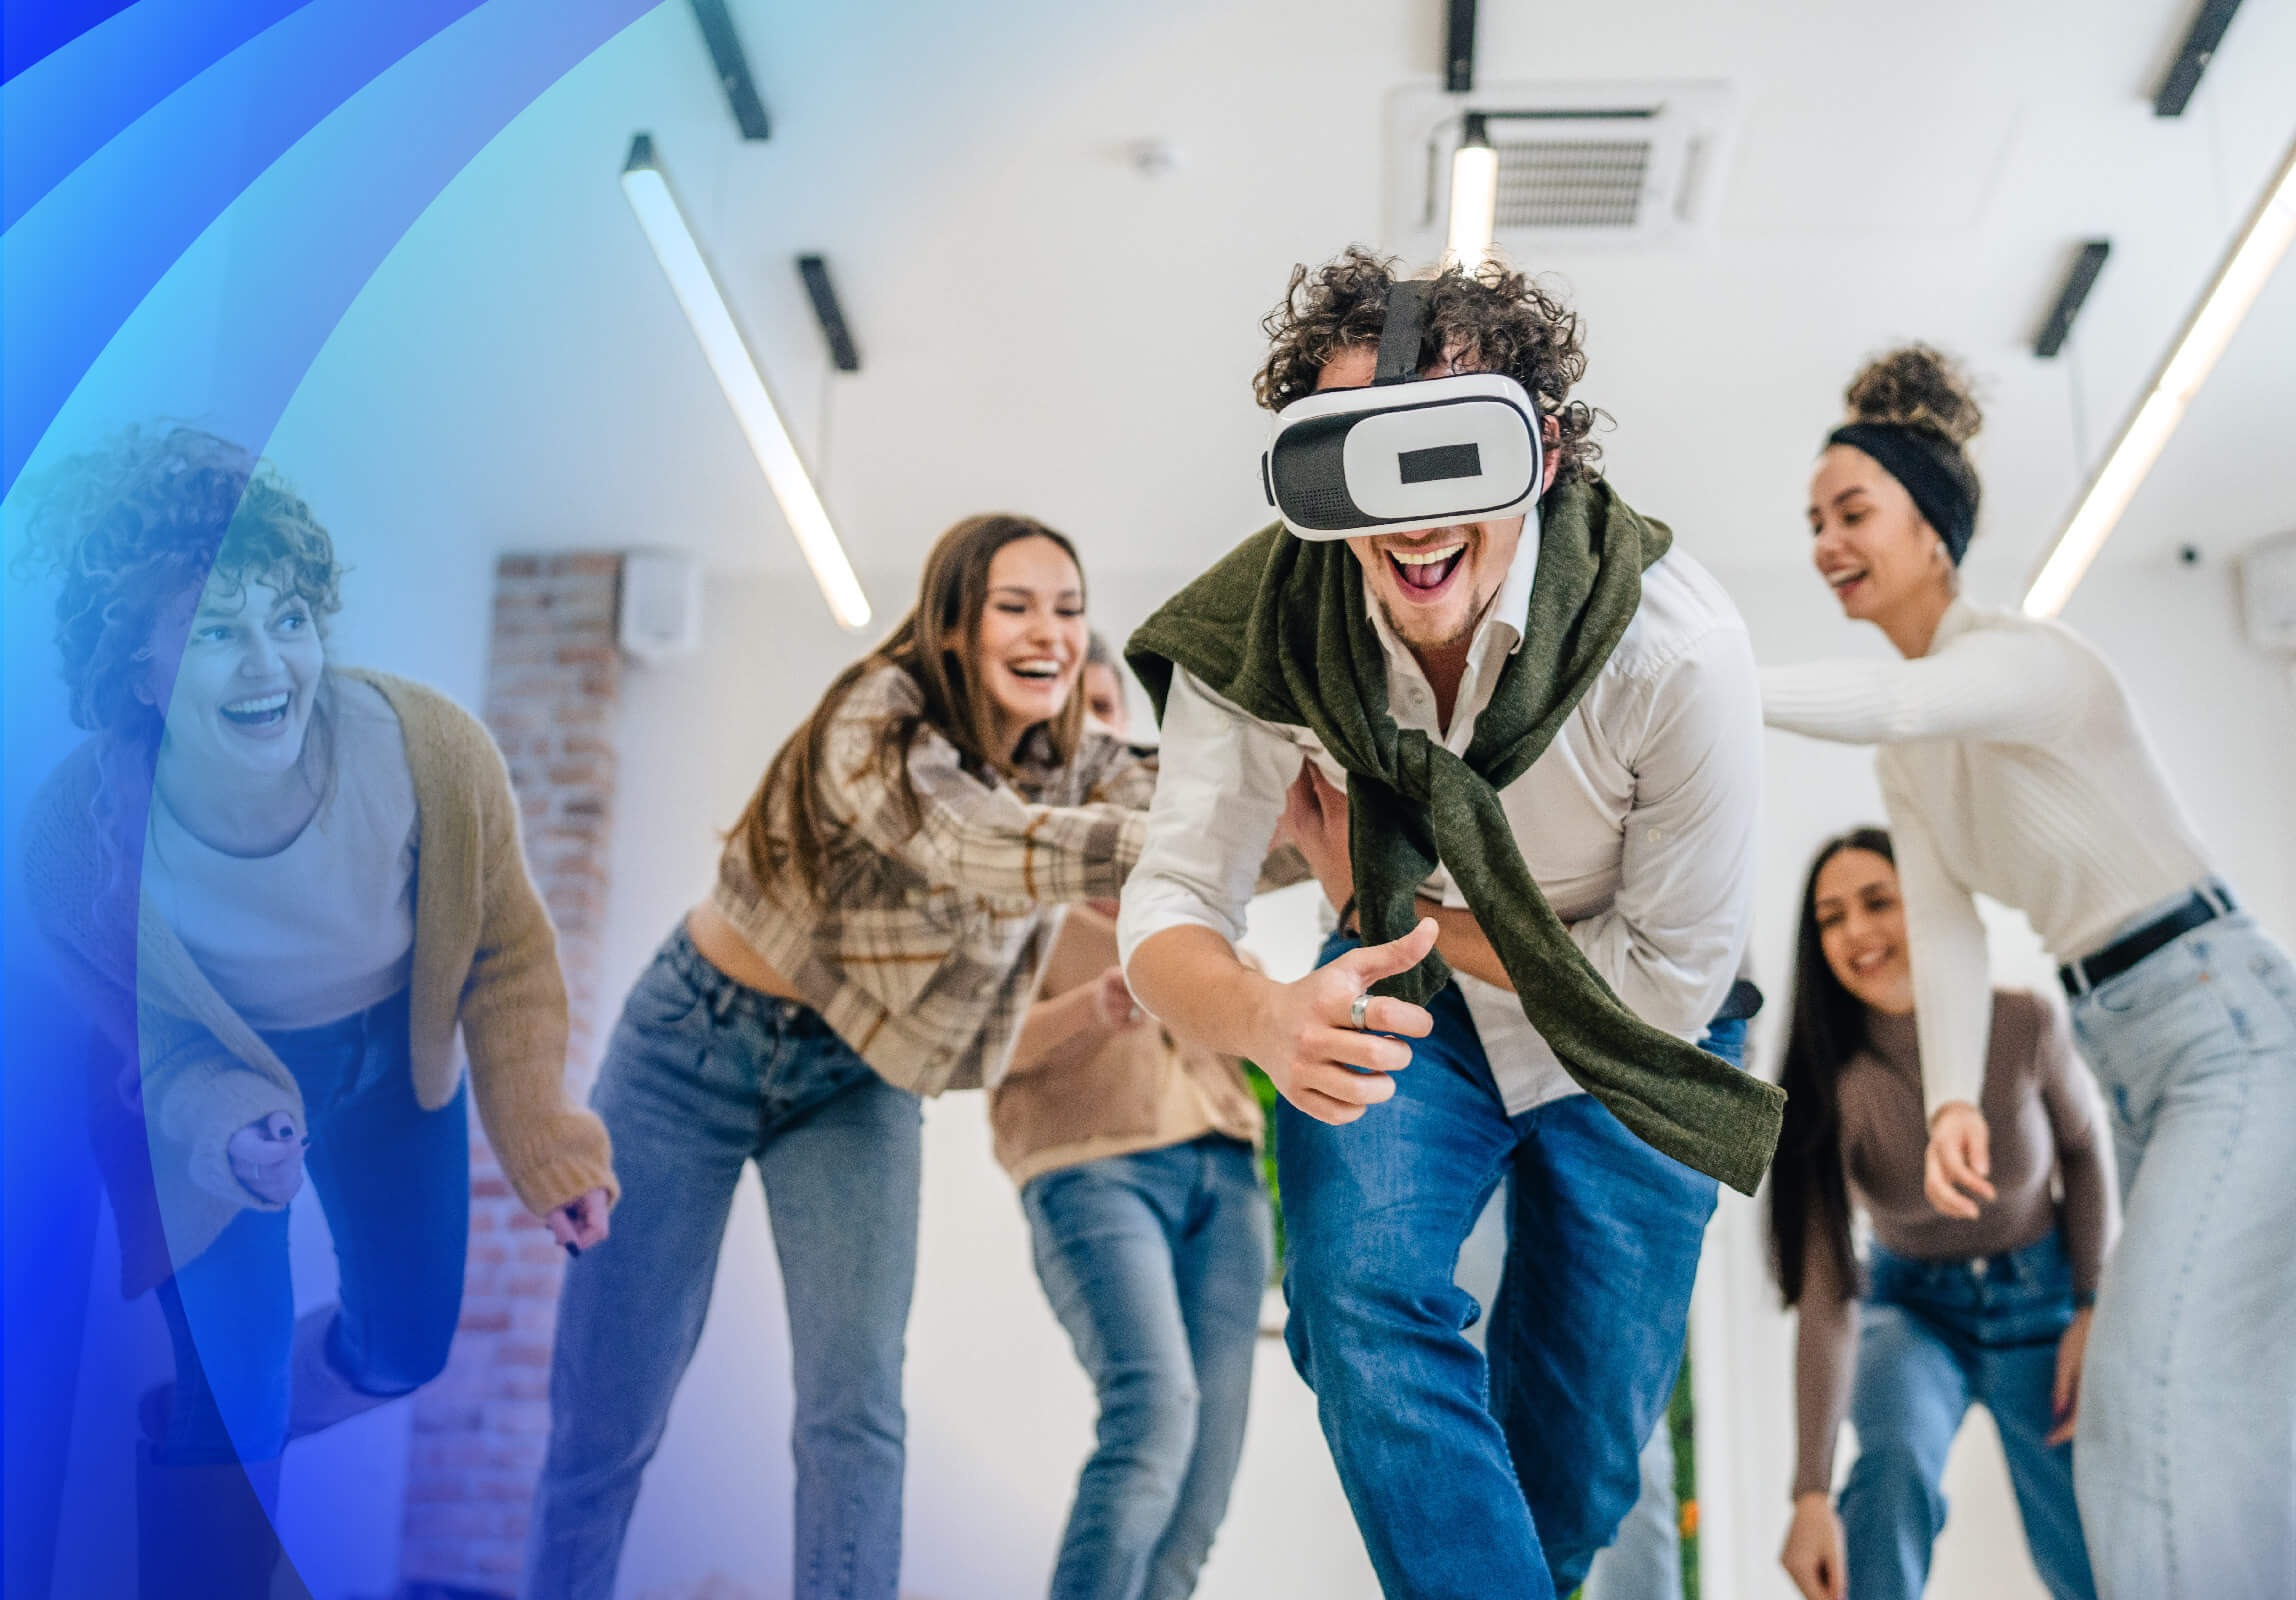 Group of people using VR headset smiling